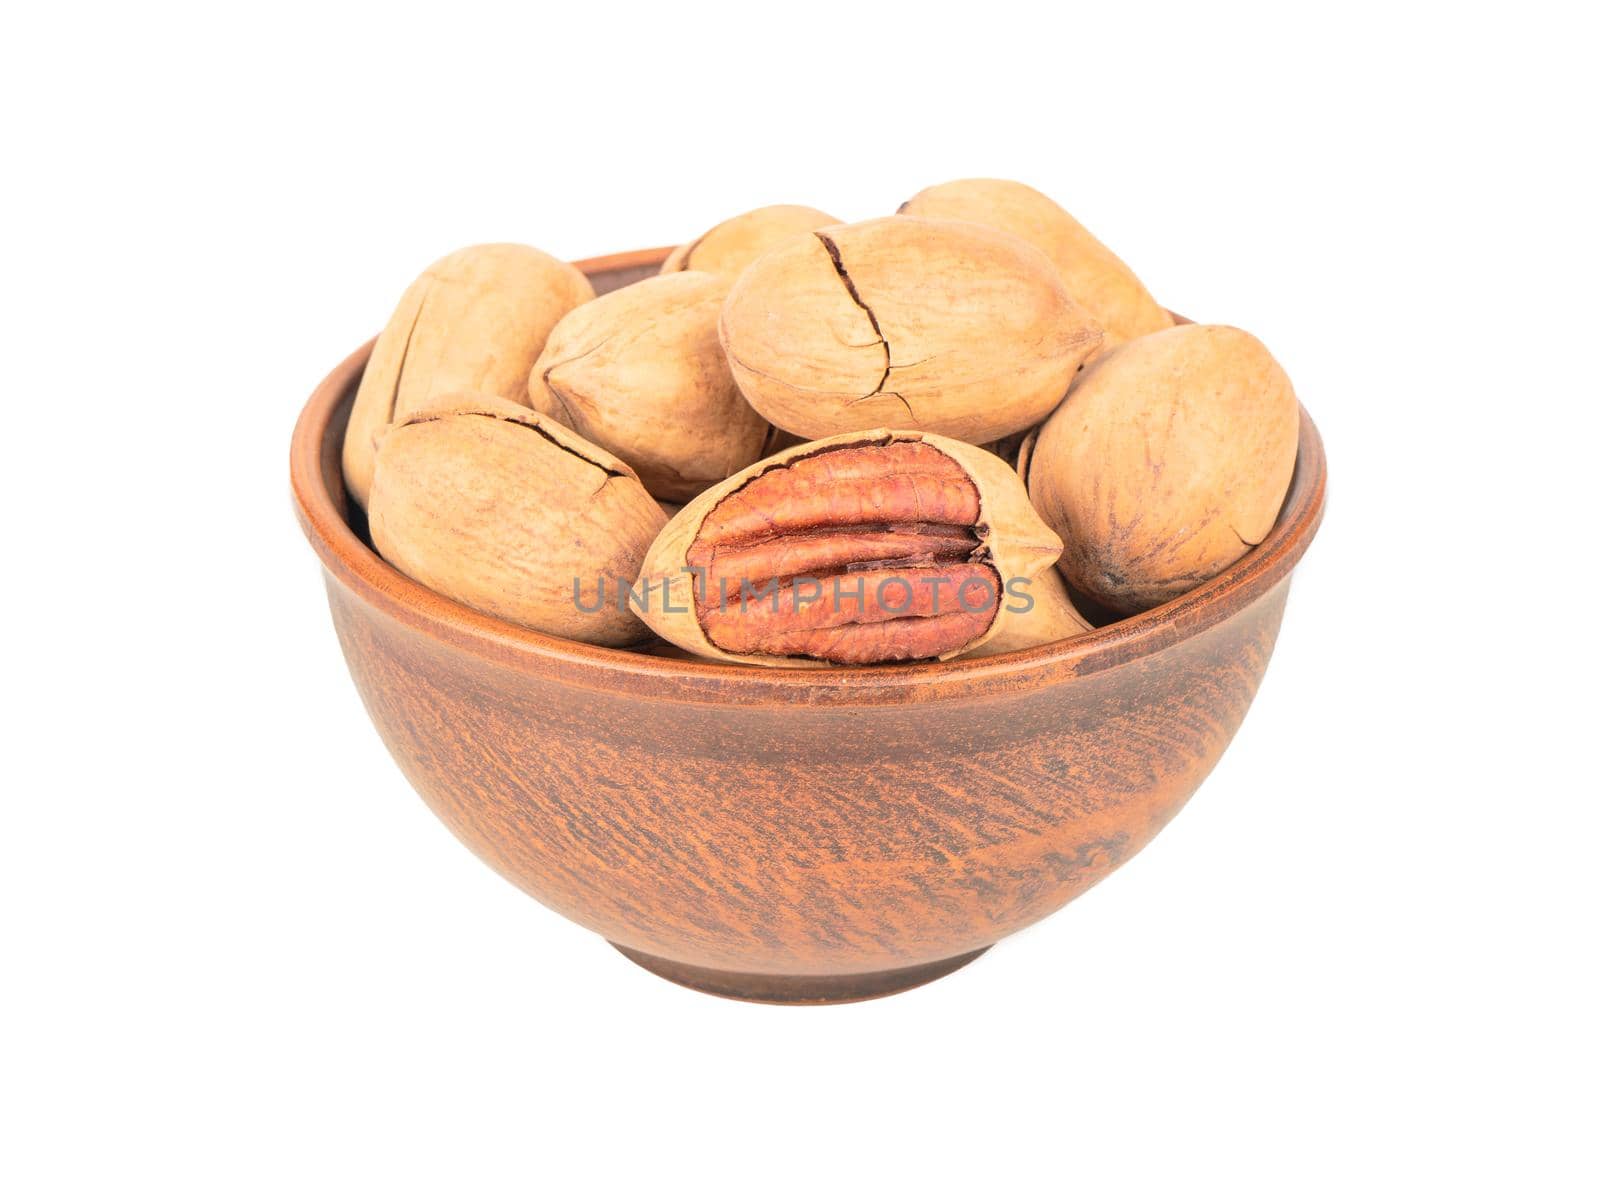 Pecans nuts in a bowl by andregric